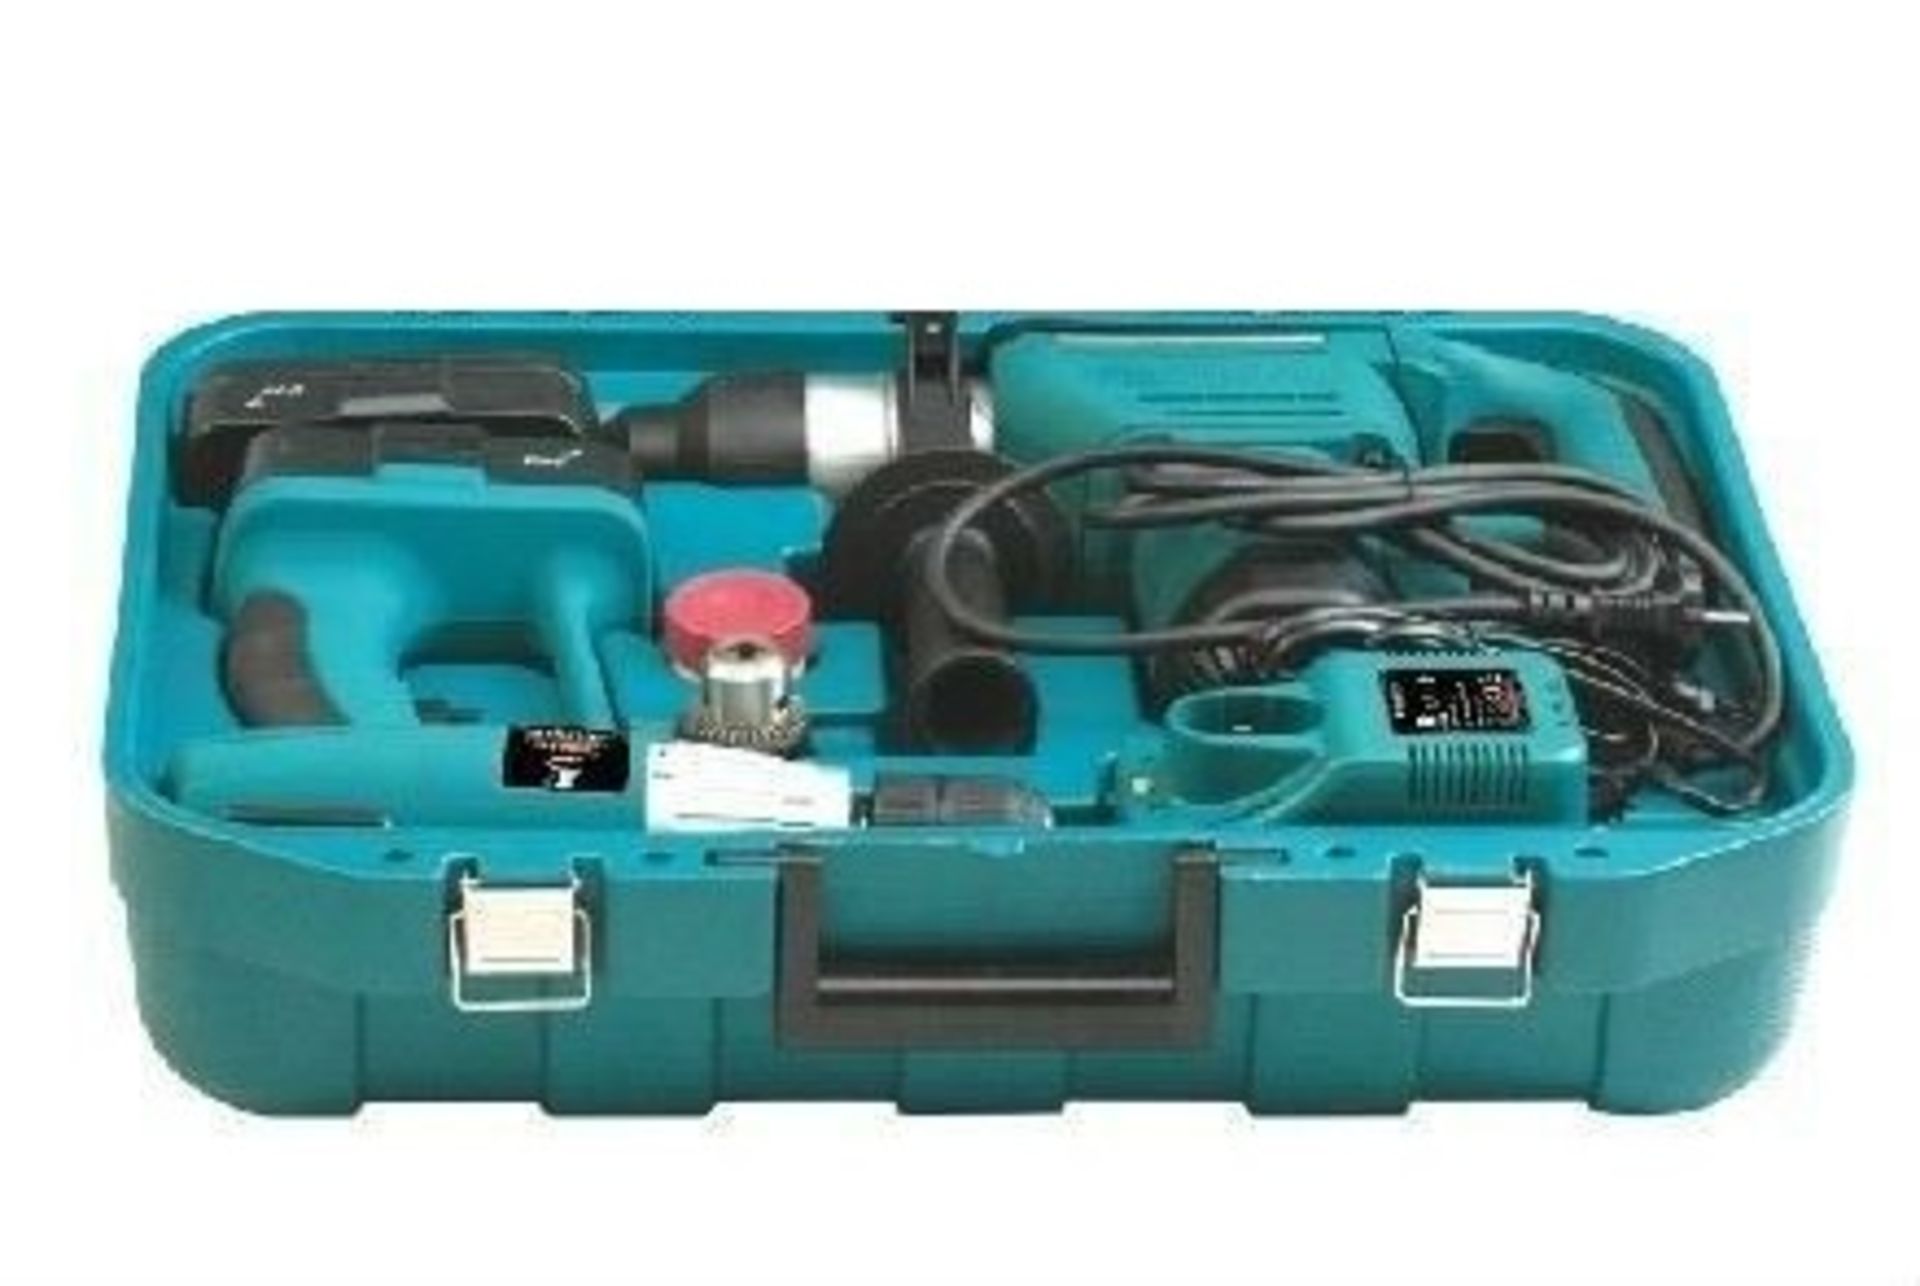 V Brand New Twin Drill Set - 32mm Hammer Drill and 24V Cordless Drill - Includes Battery Charger and